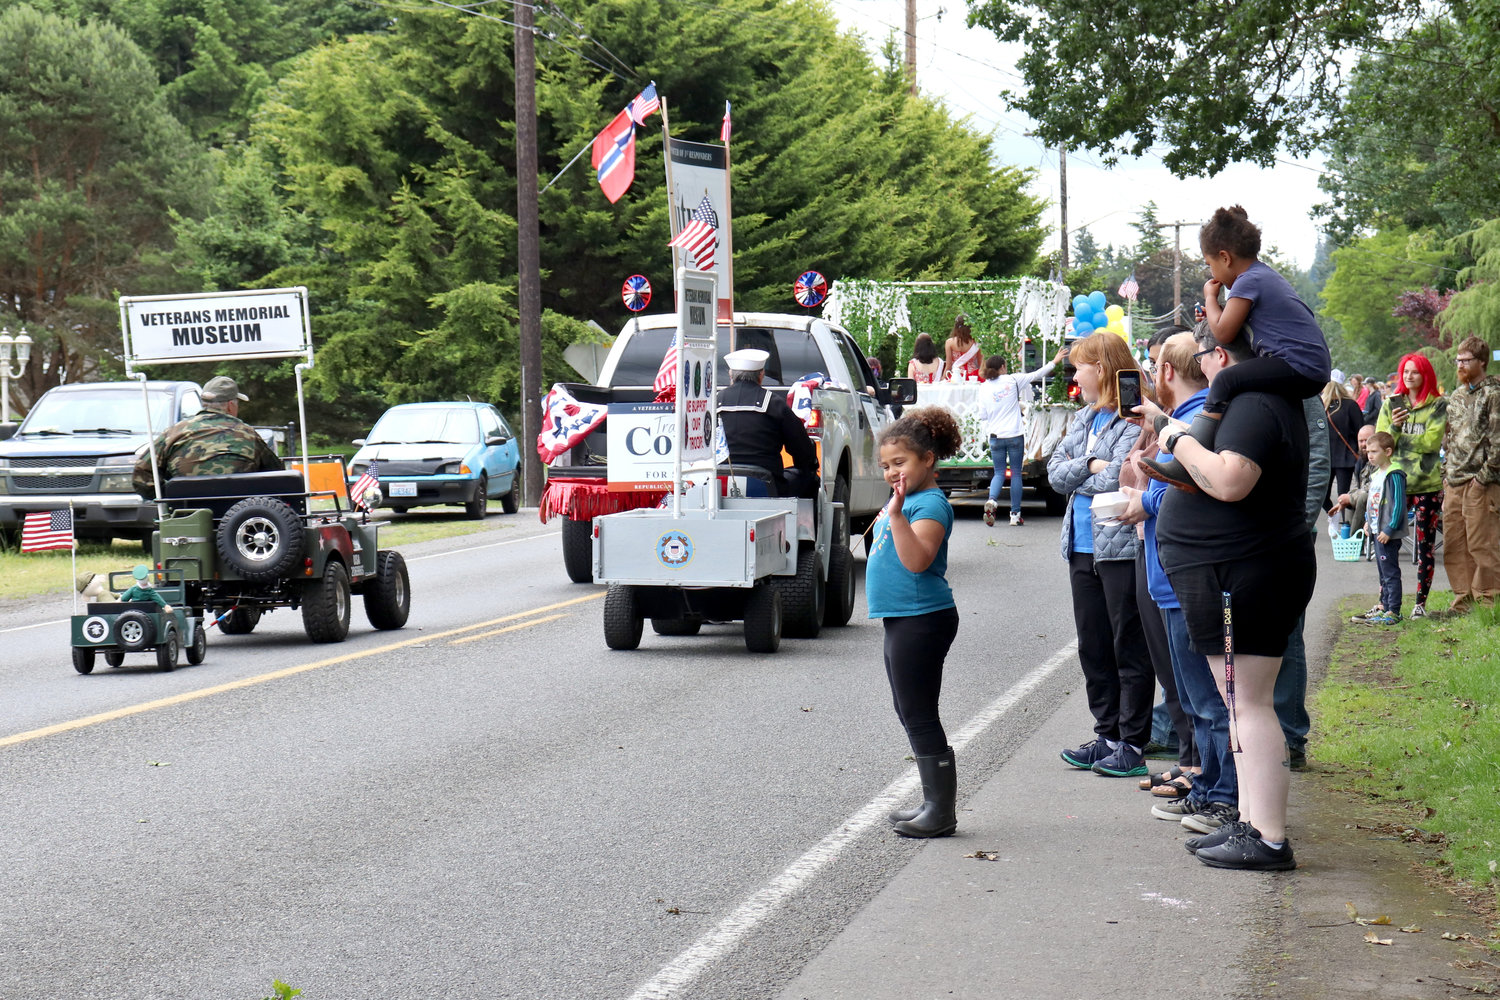 People wave as small vehicles representing the Veterans Memorial Museum pass by during the Swede Day Parade in Rochester on Saturday.